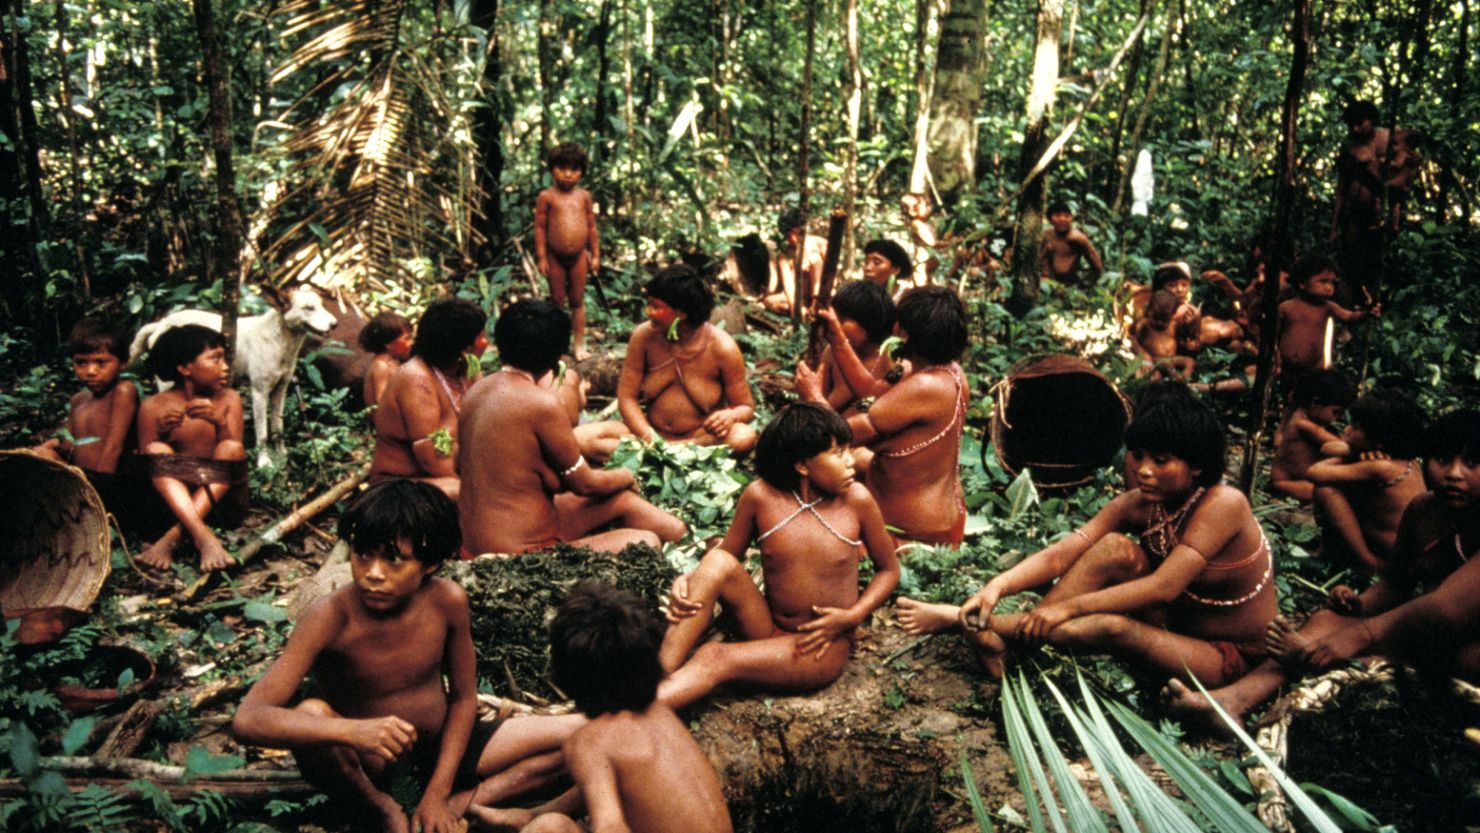 The Yanomami are considered the largest indigenous group in the Americas that remains largely untouched by  the outside world.